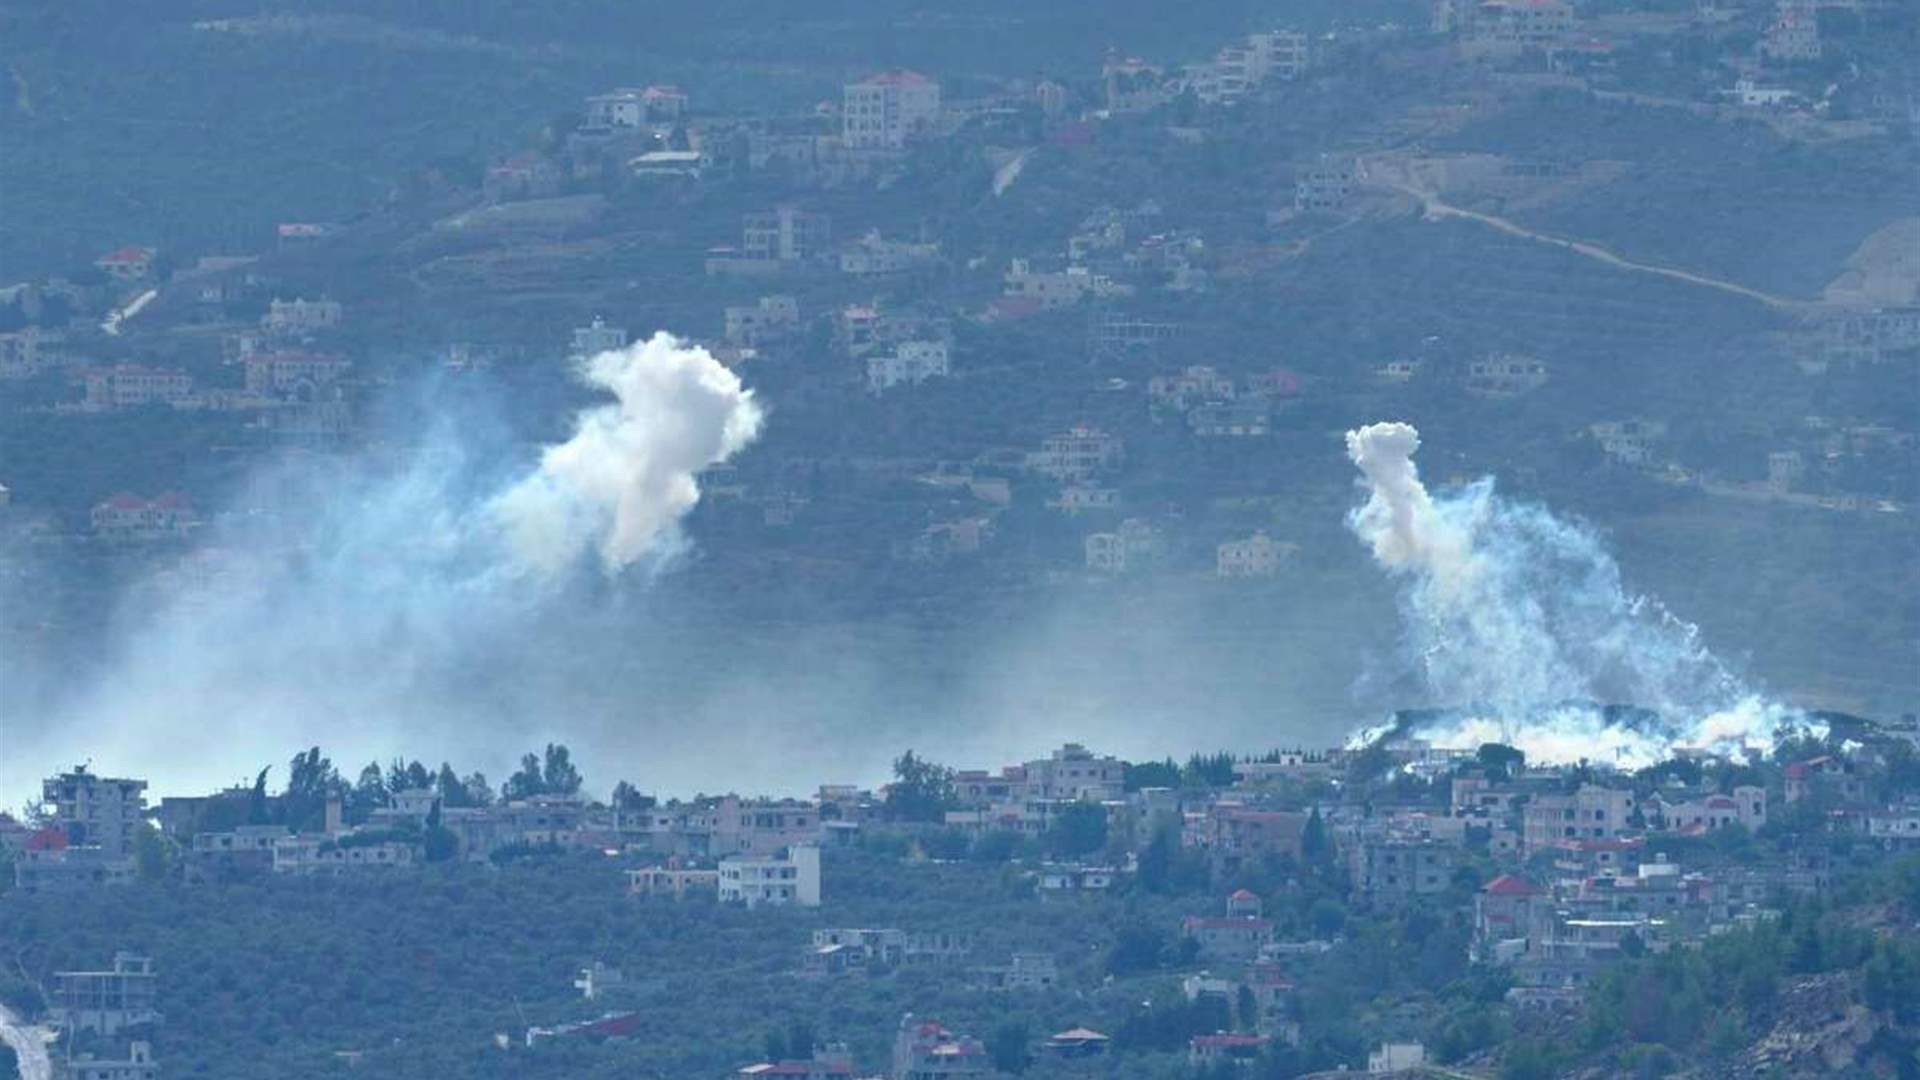 Israeli army spokesperson: We will strongly respond to rocket launches from Southern Lebanon, and anything could happen at any moment